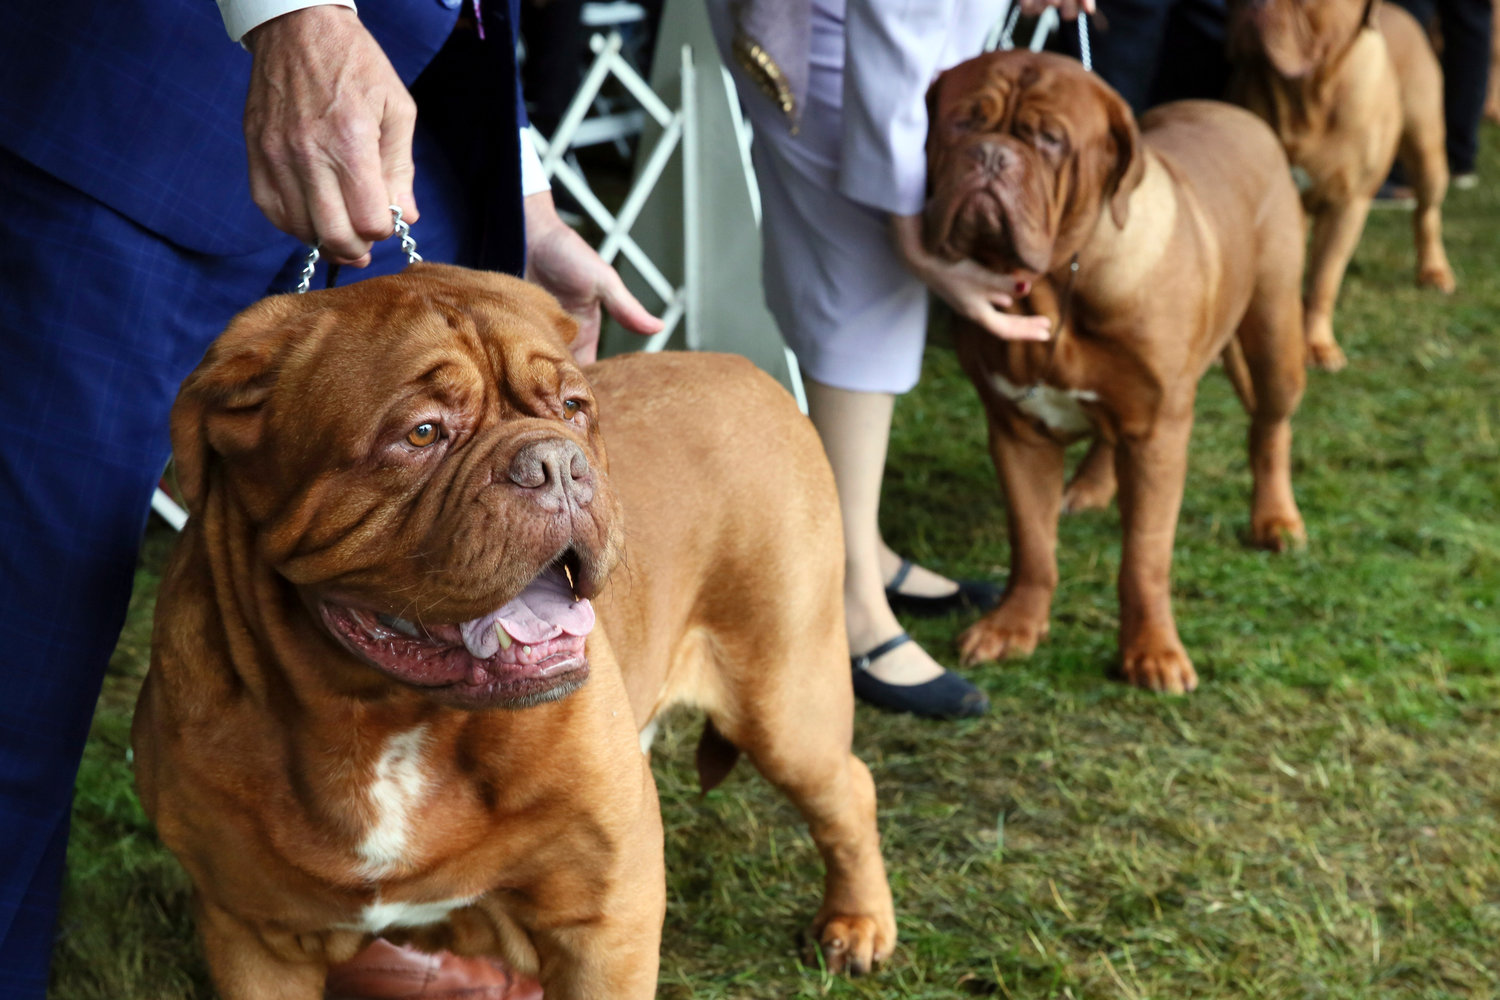 Dogues de Bordeaux compete at the Westminster Kennel Club Dog Show, Wednesday, June 22, 2022, in Tarrytown, N.Y. (AP Photo/Jennifer Peltz)